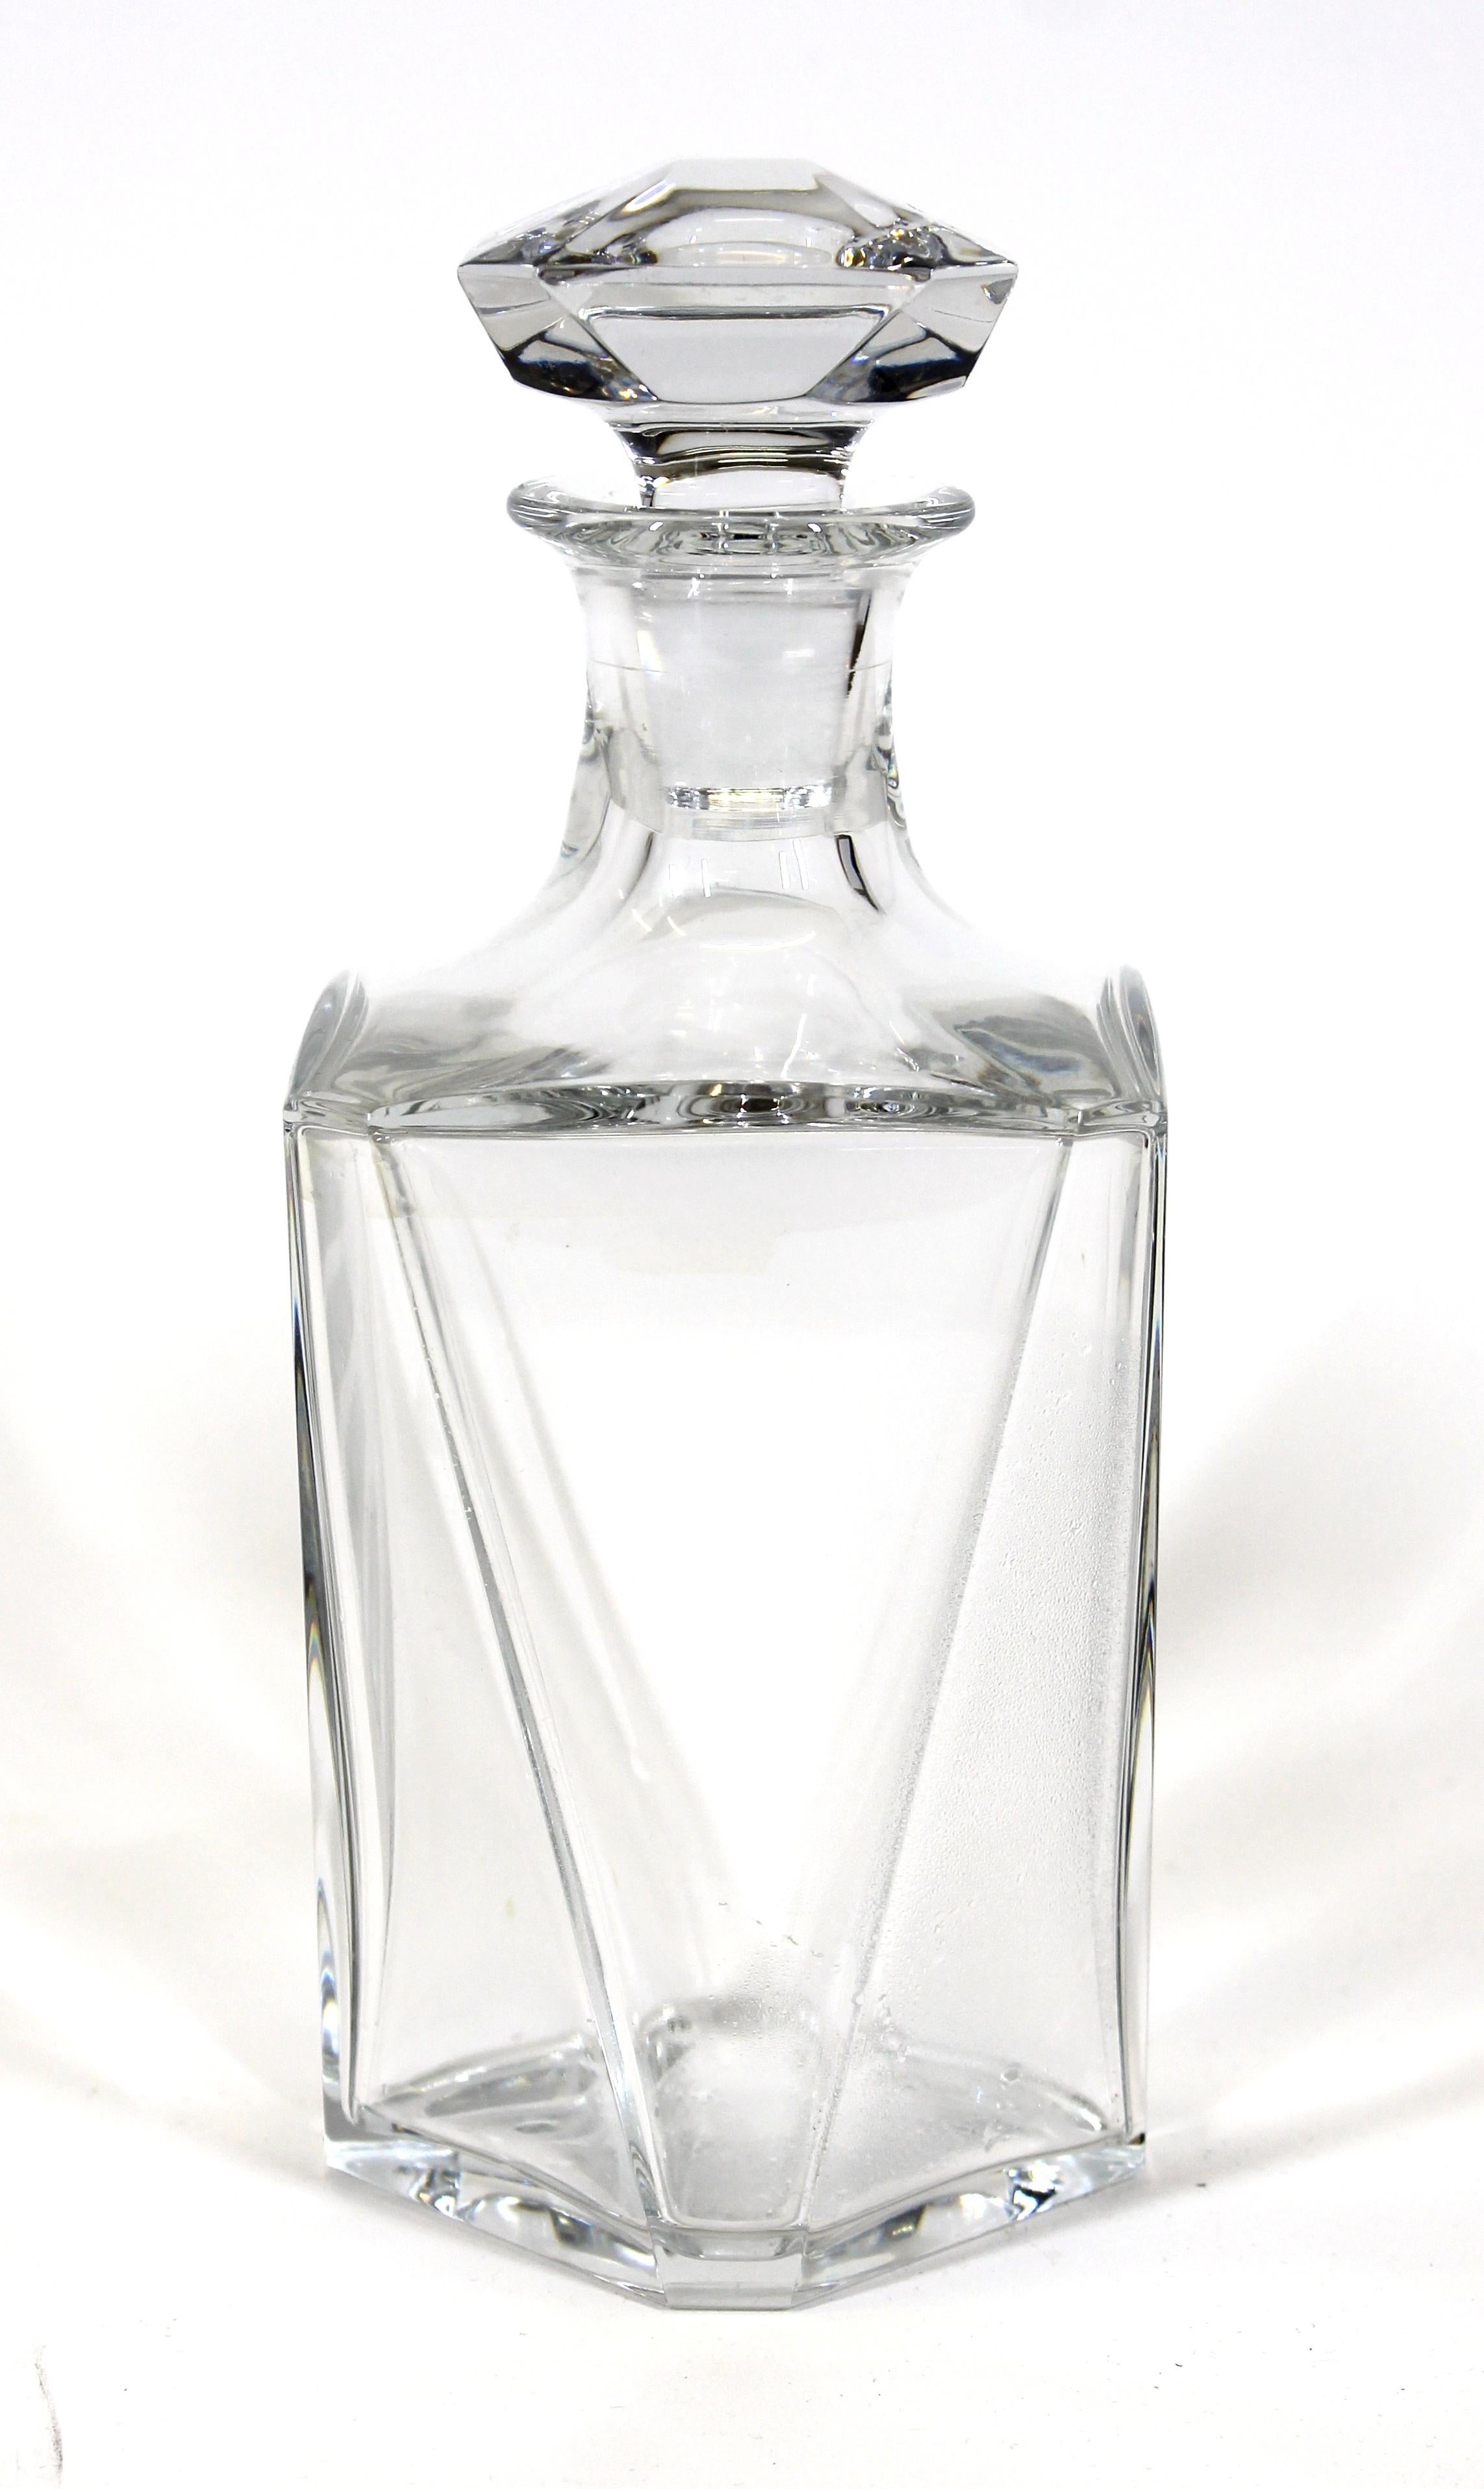 Baccarat 'Harcourt' French crystal decanter with stopper, marked on the bottom.